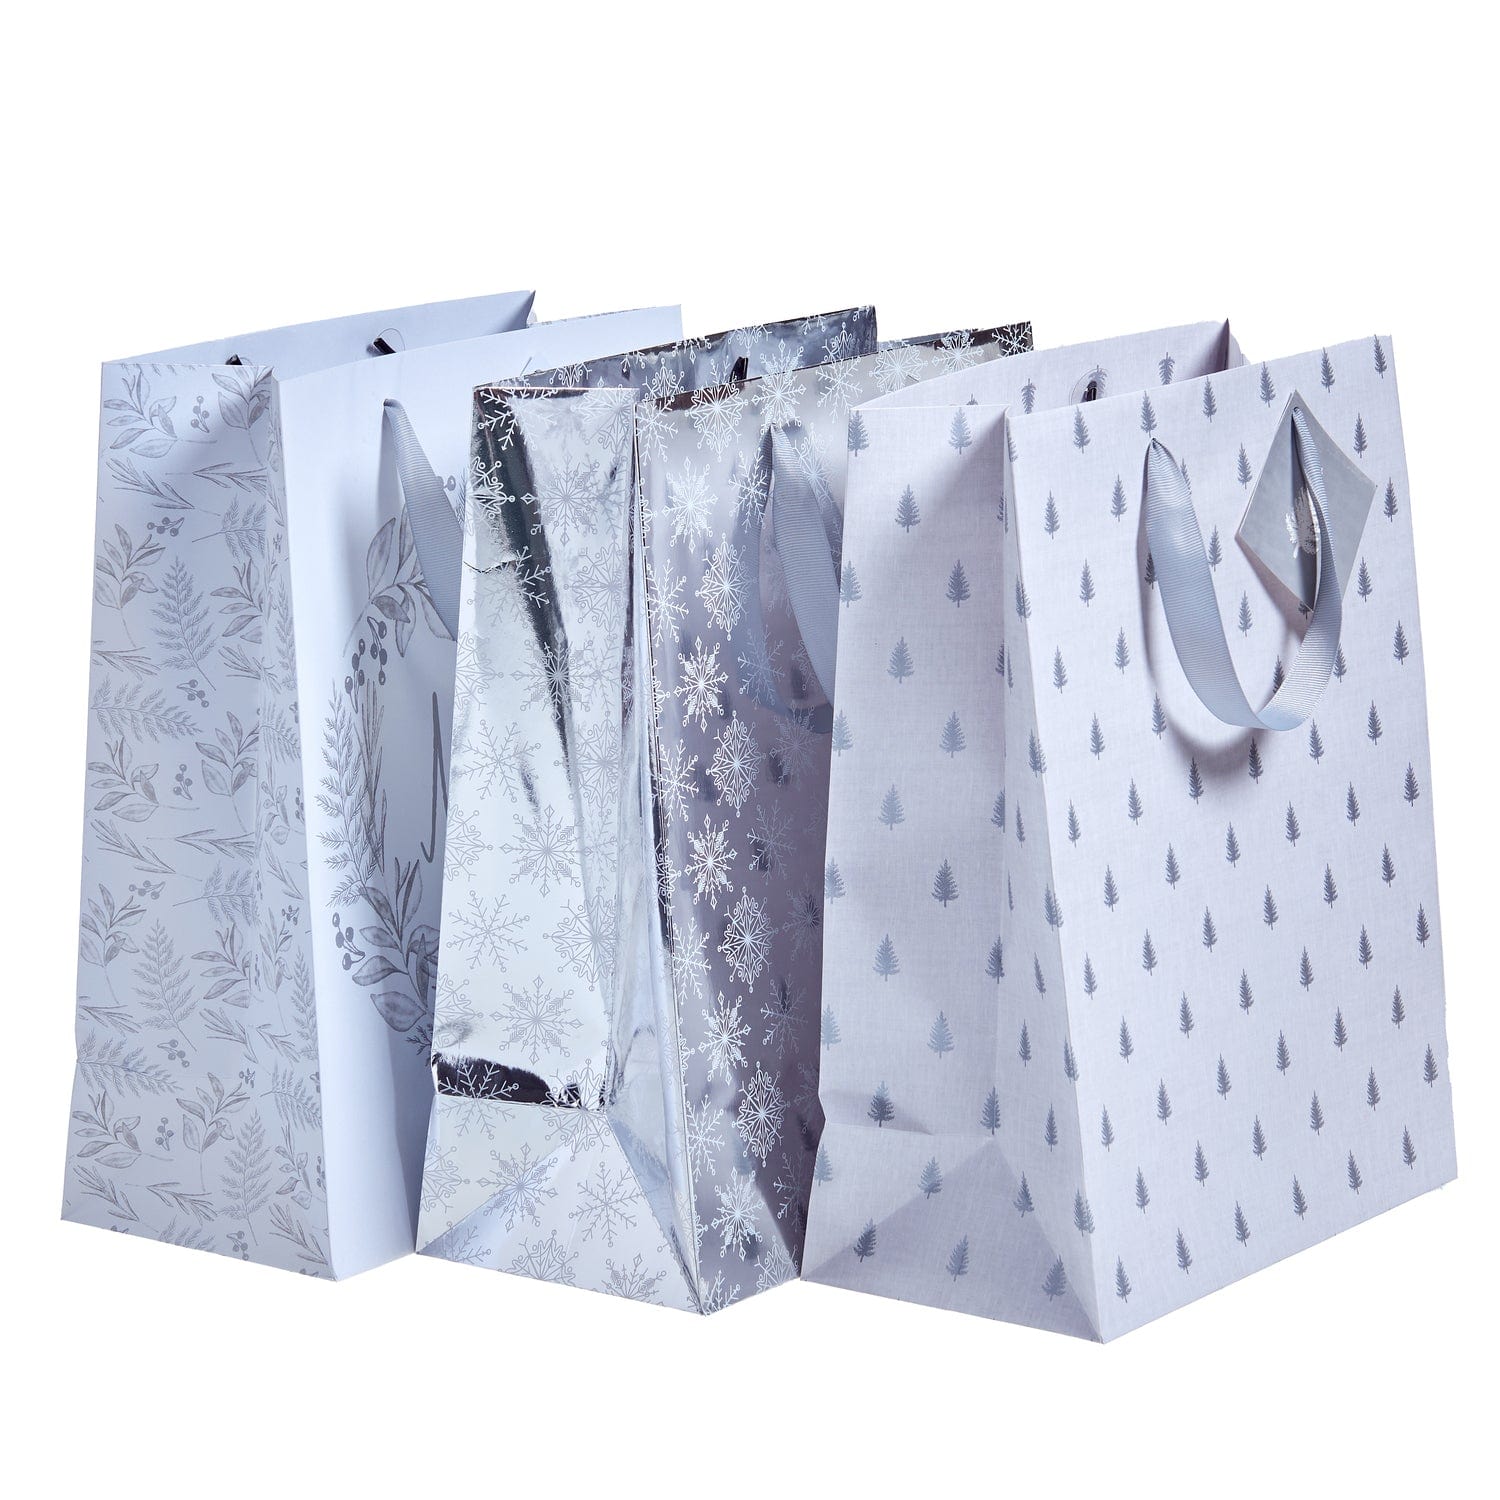 Silver Gift Bags with Tags - 3 Count Gartner Studios Gift Bags 95770